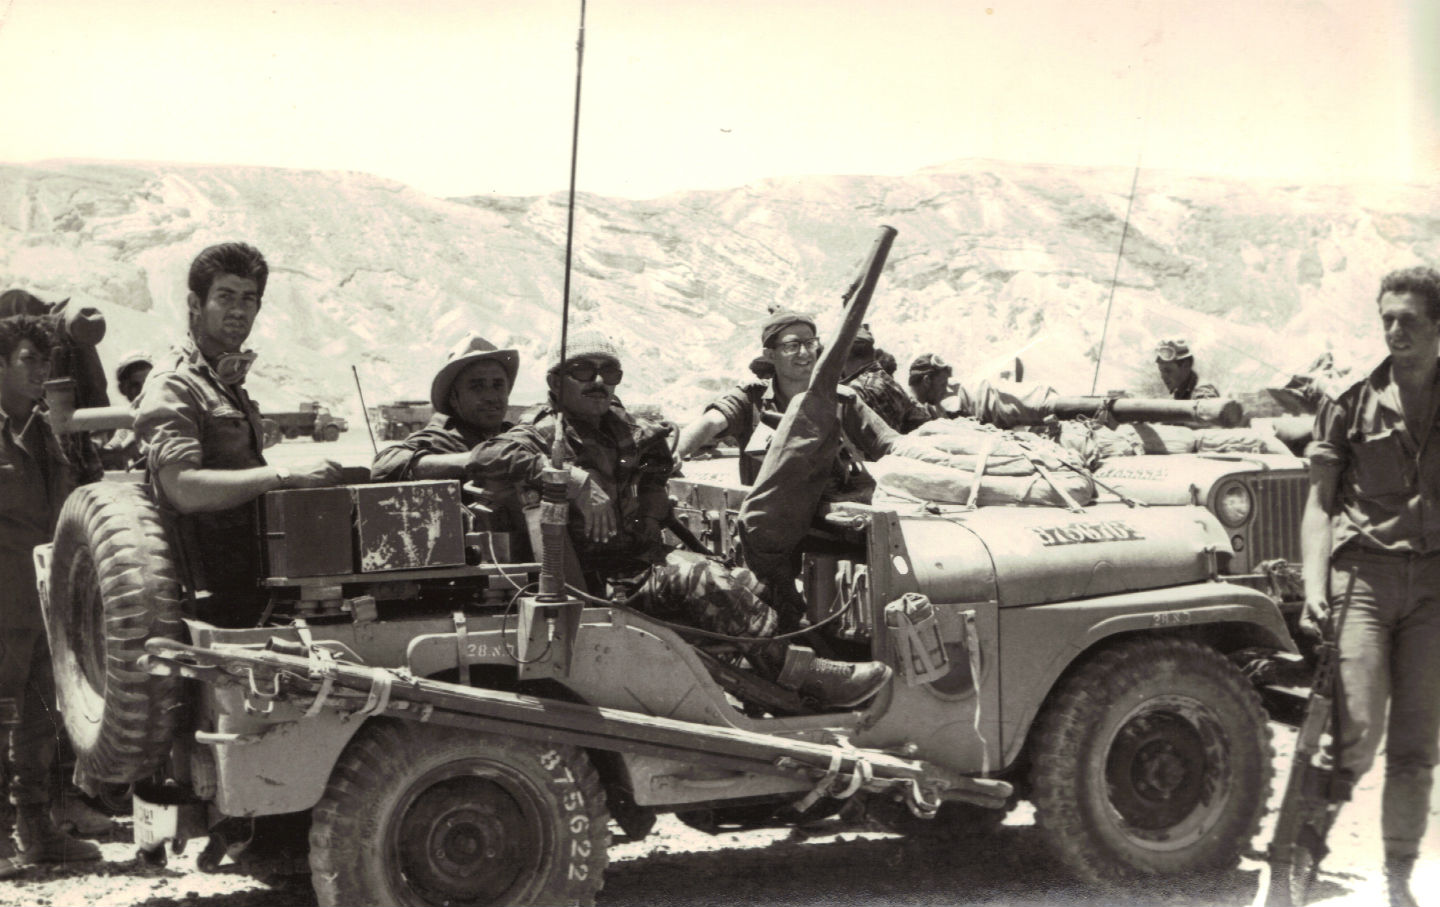 June 11, 1967: The Six-Day War Ends in Israeli Victory, and Occupation